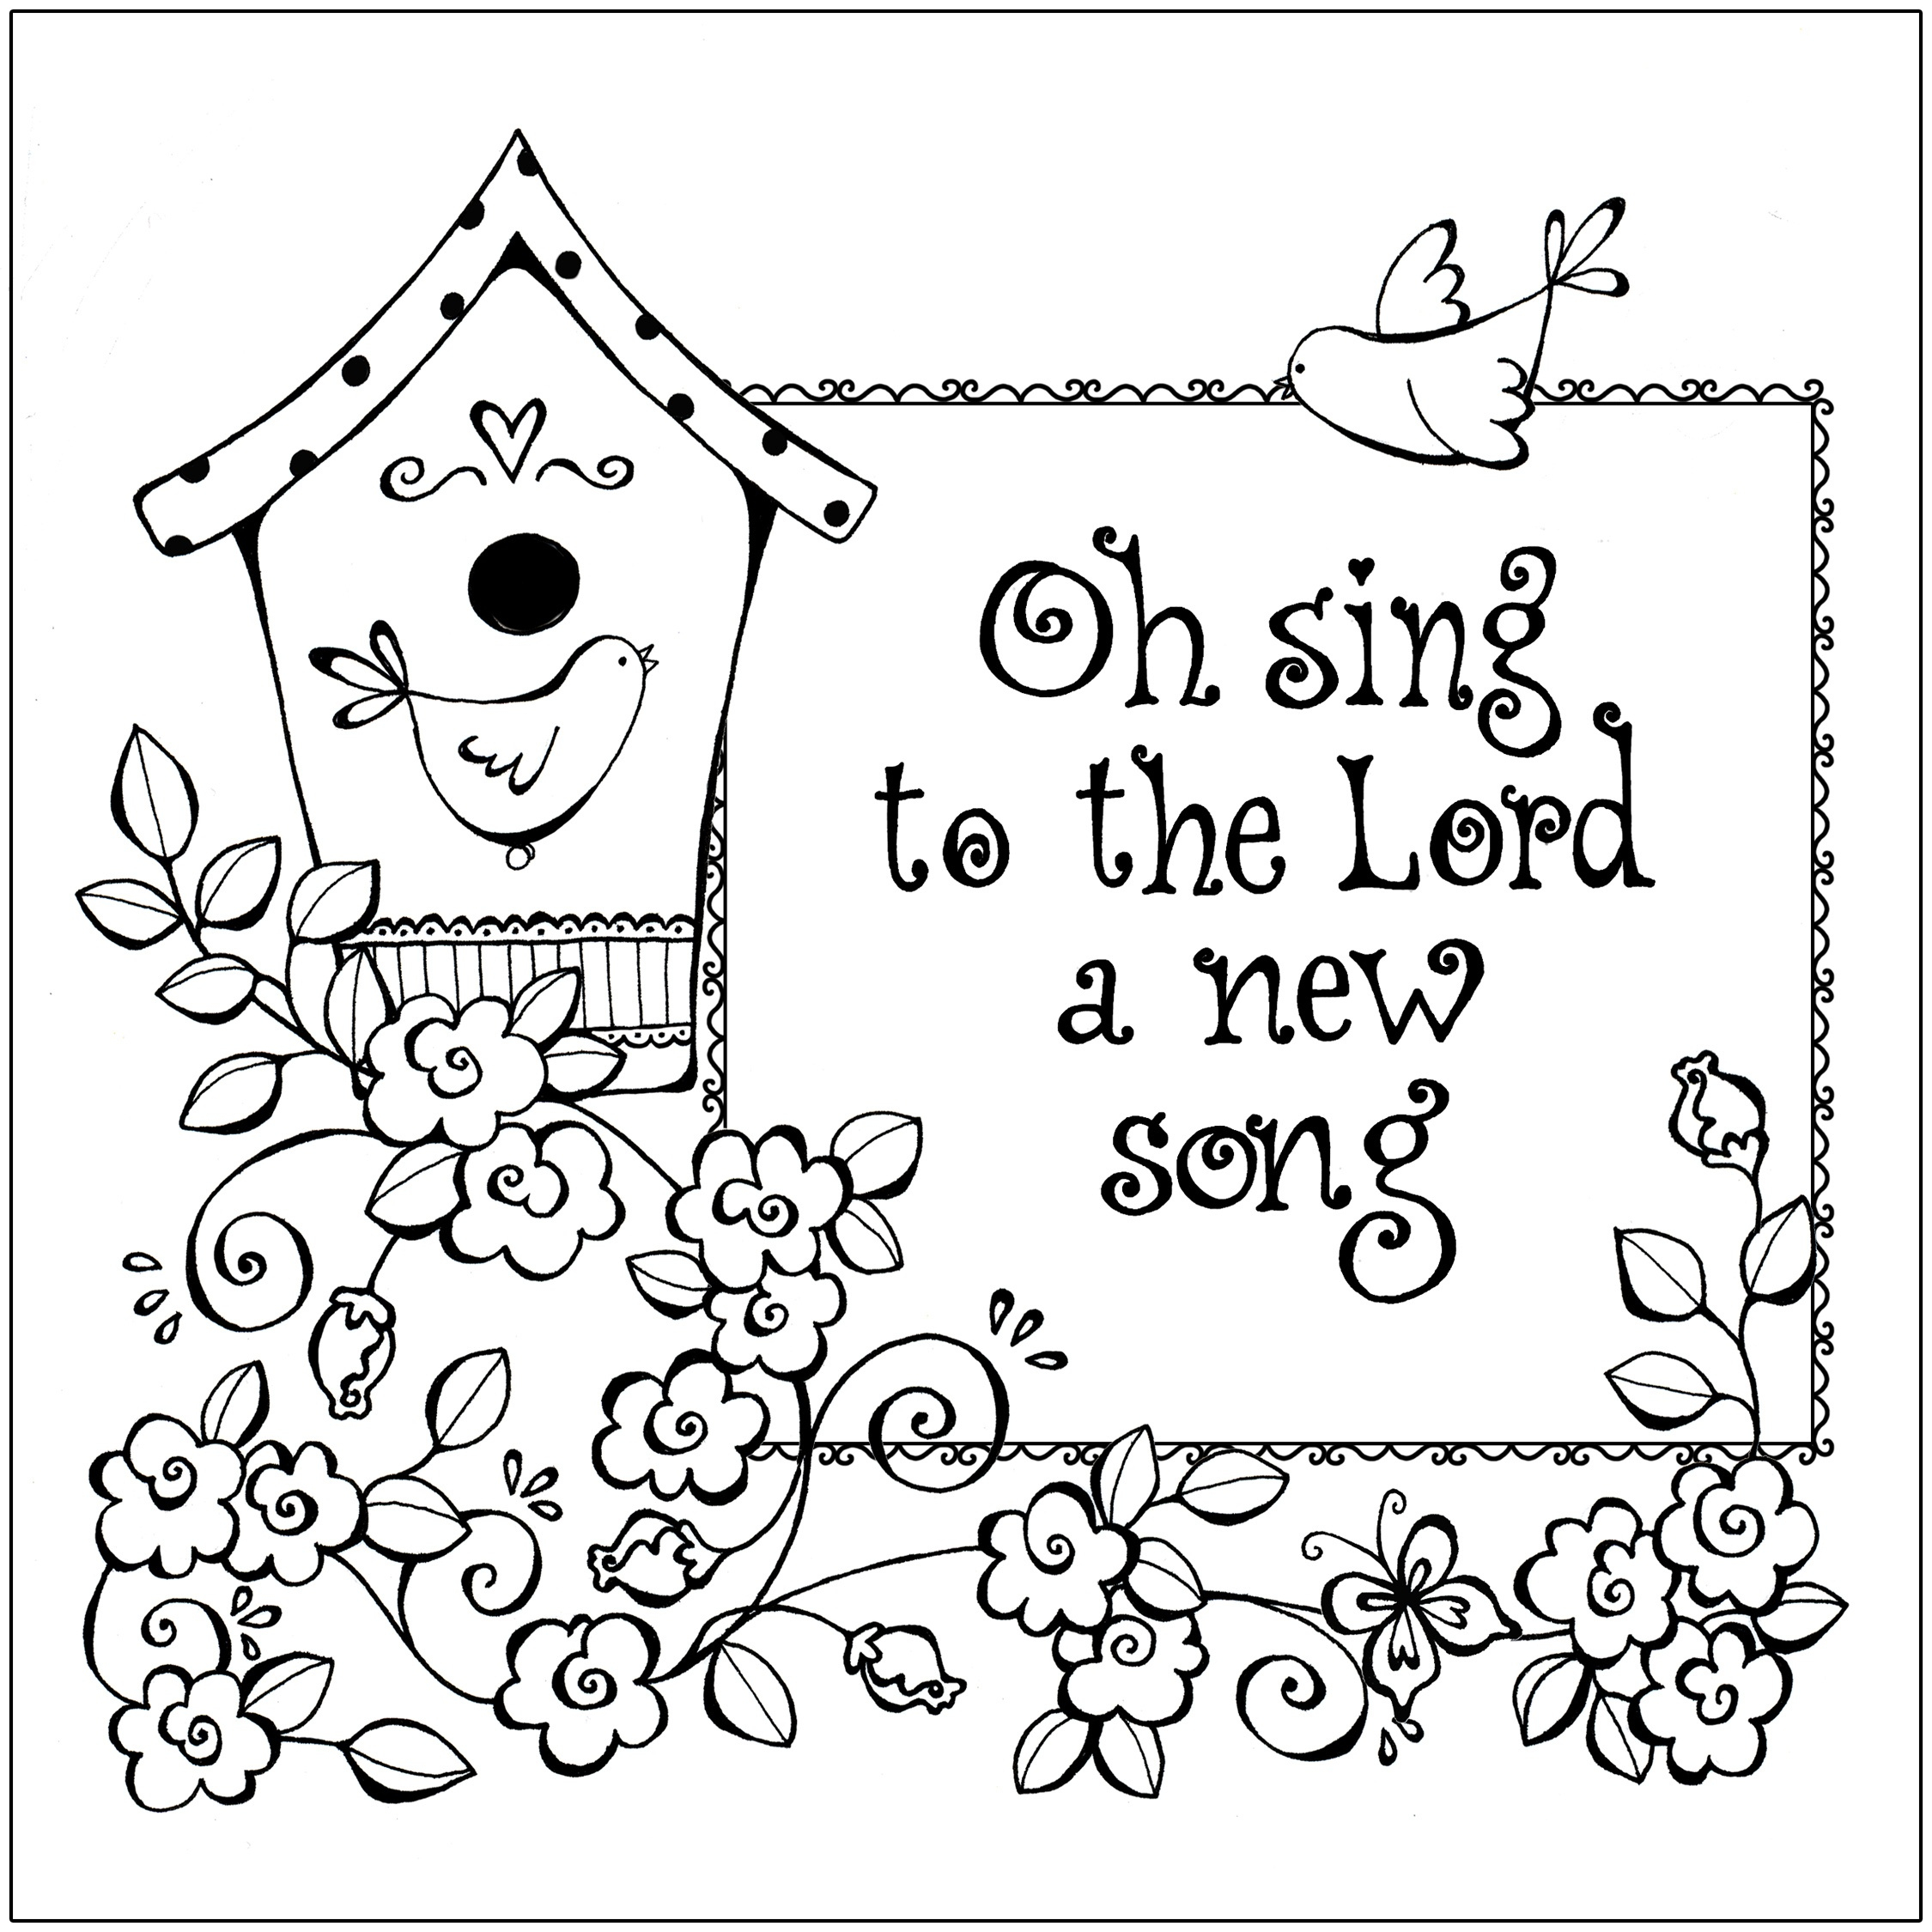 Coloring Pages : Printable Coloring Pages For Bible Schoolprintable - Free Printable Sunday School Coloring Sheets